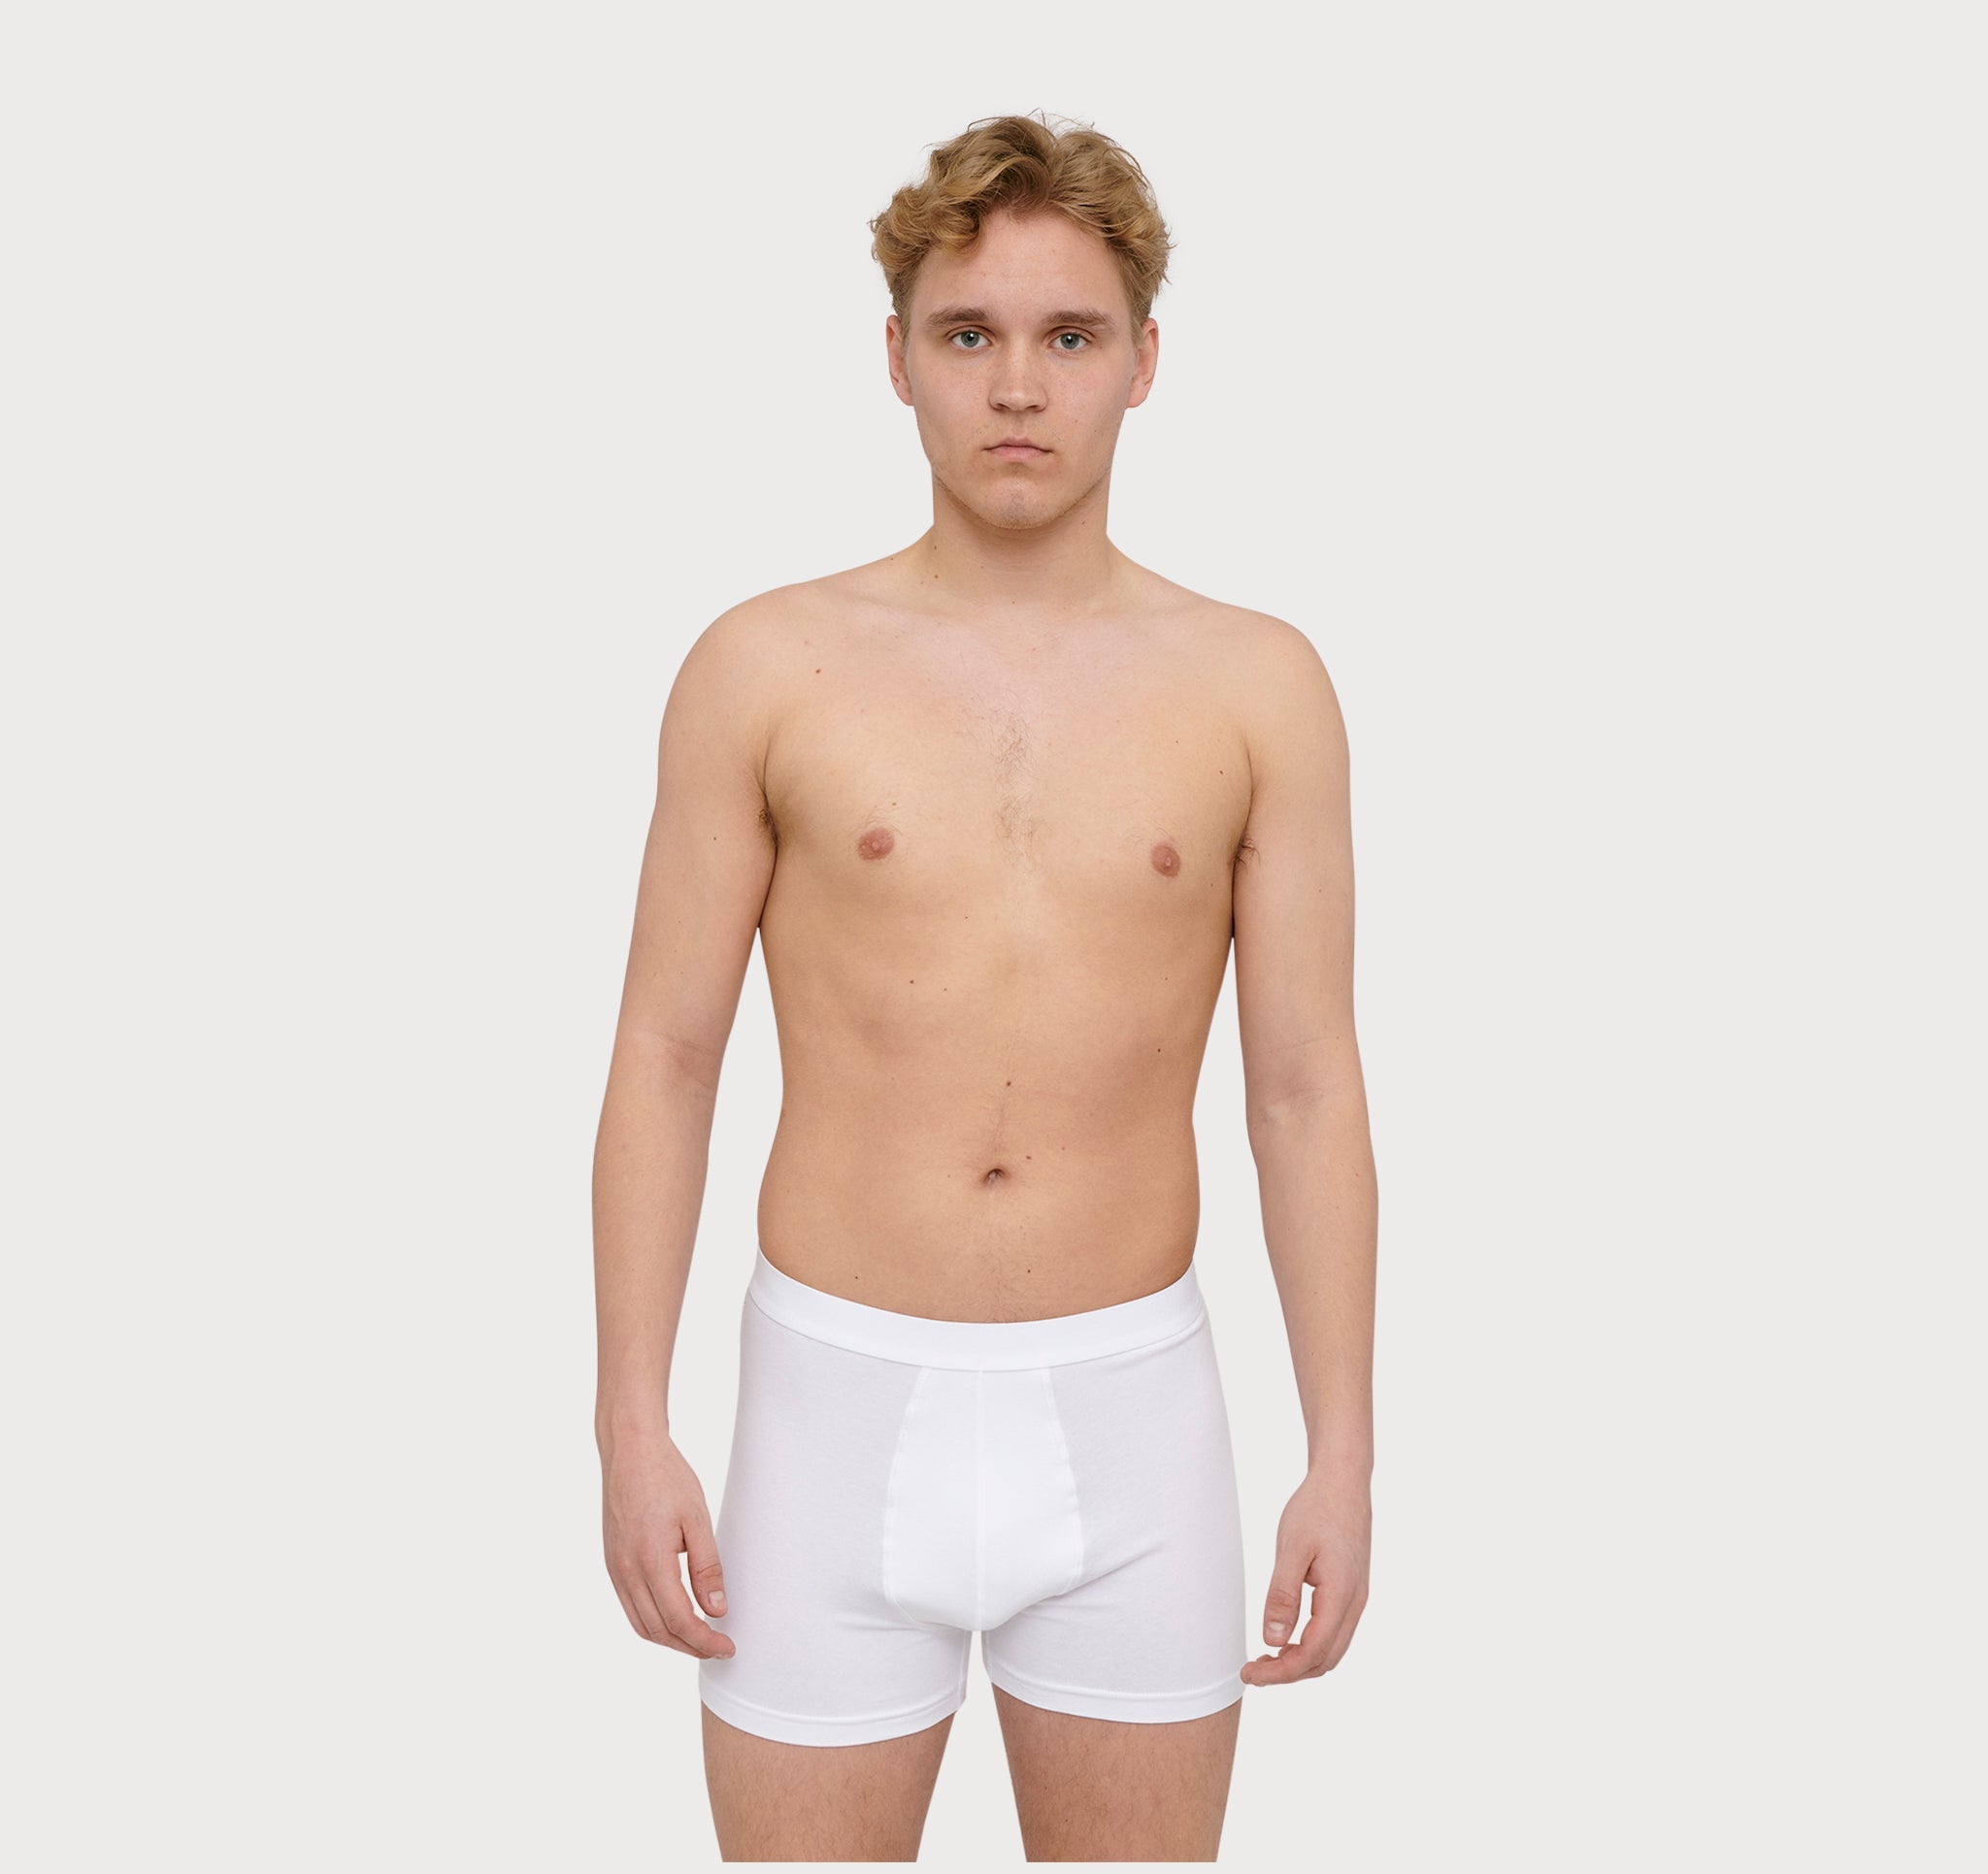 14 Ethical Underwear Brands for Him and Her 2023